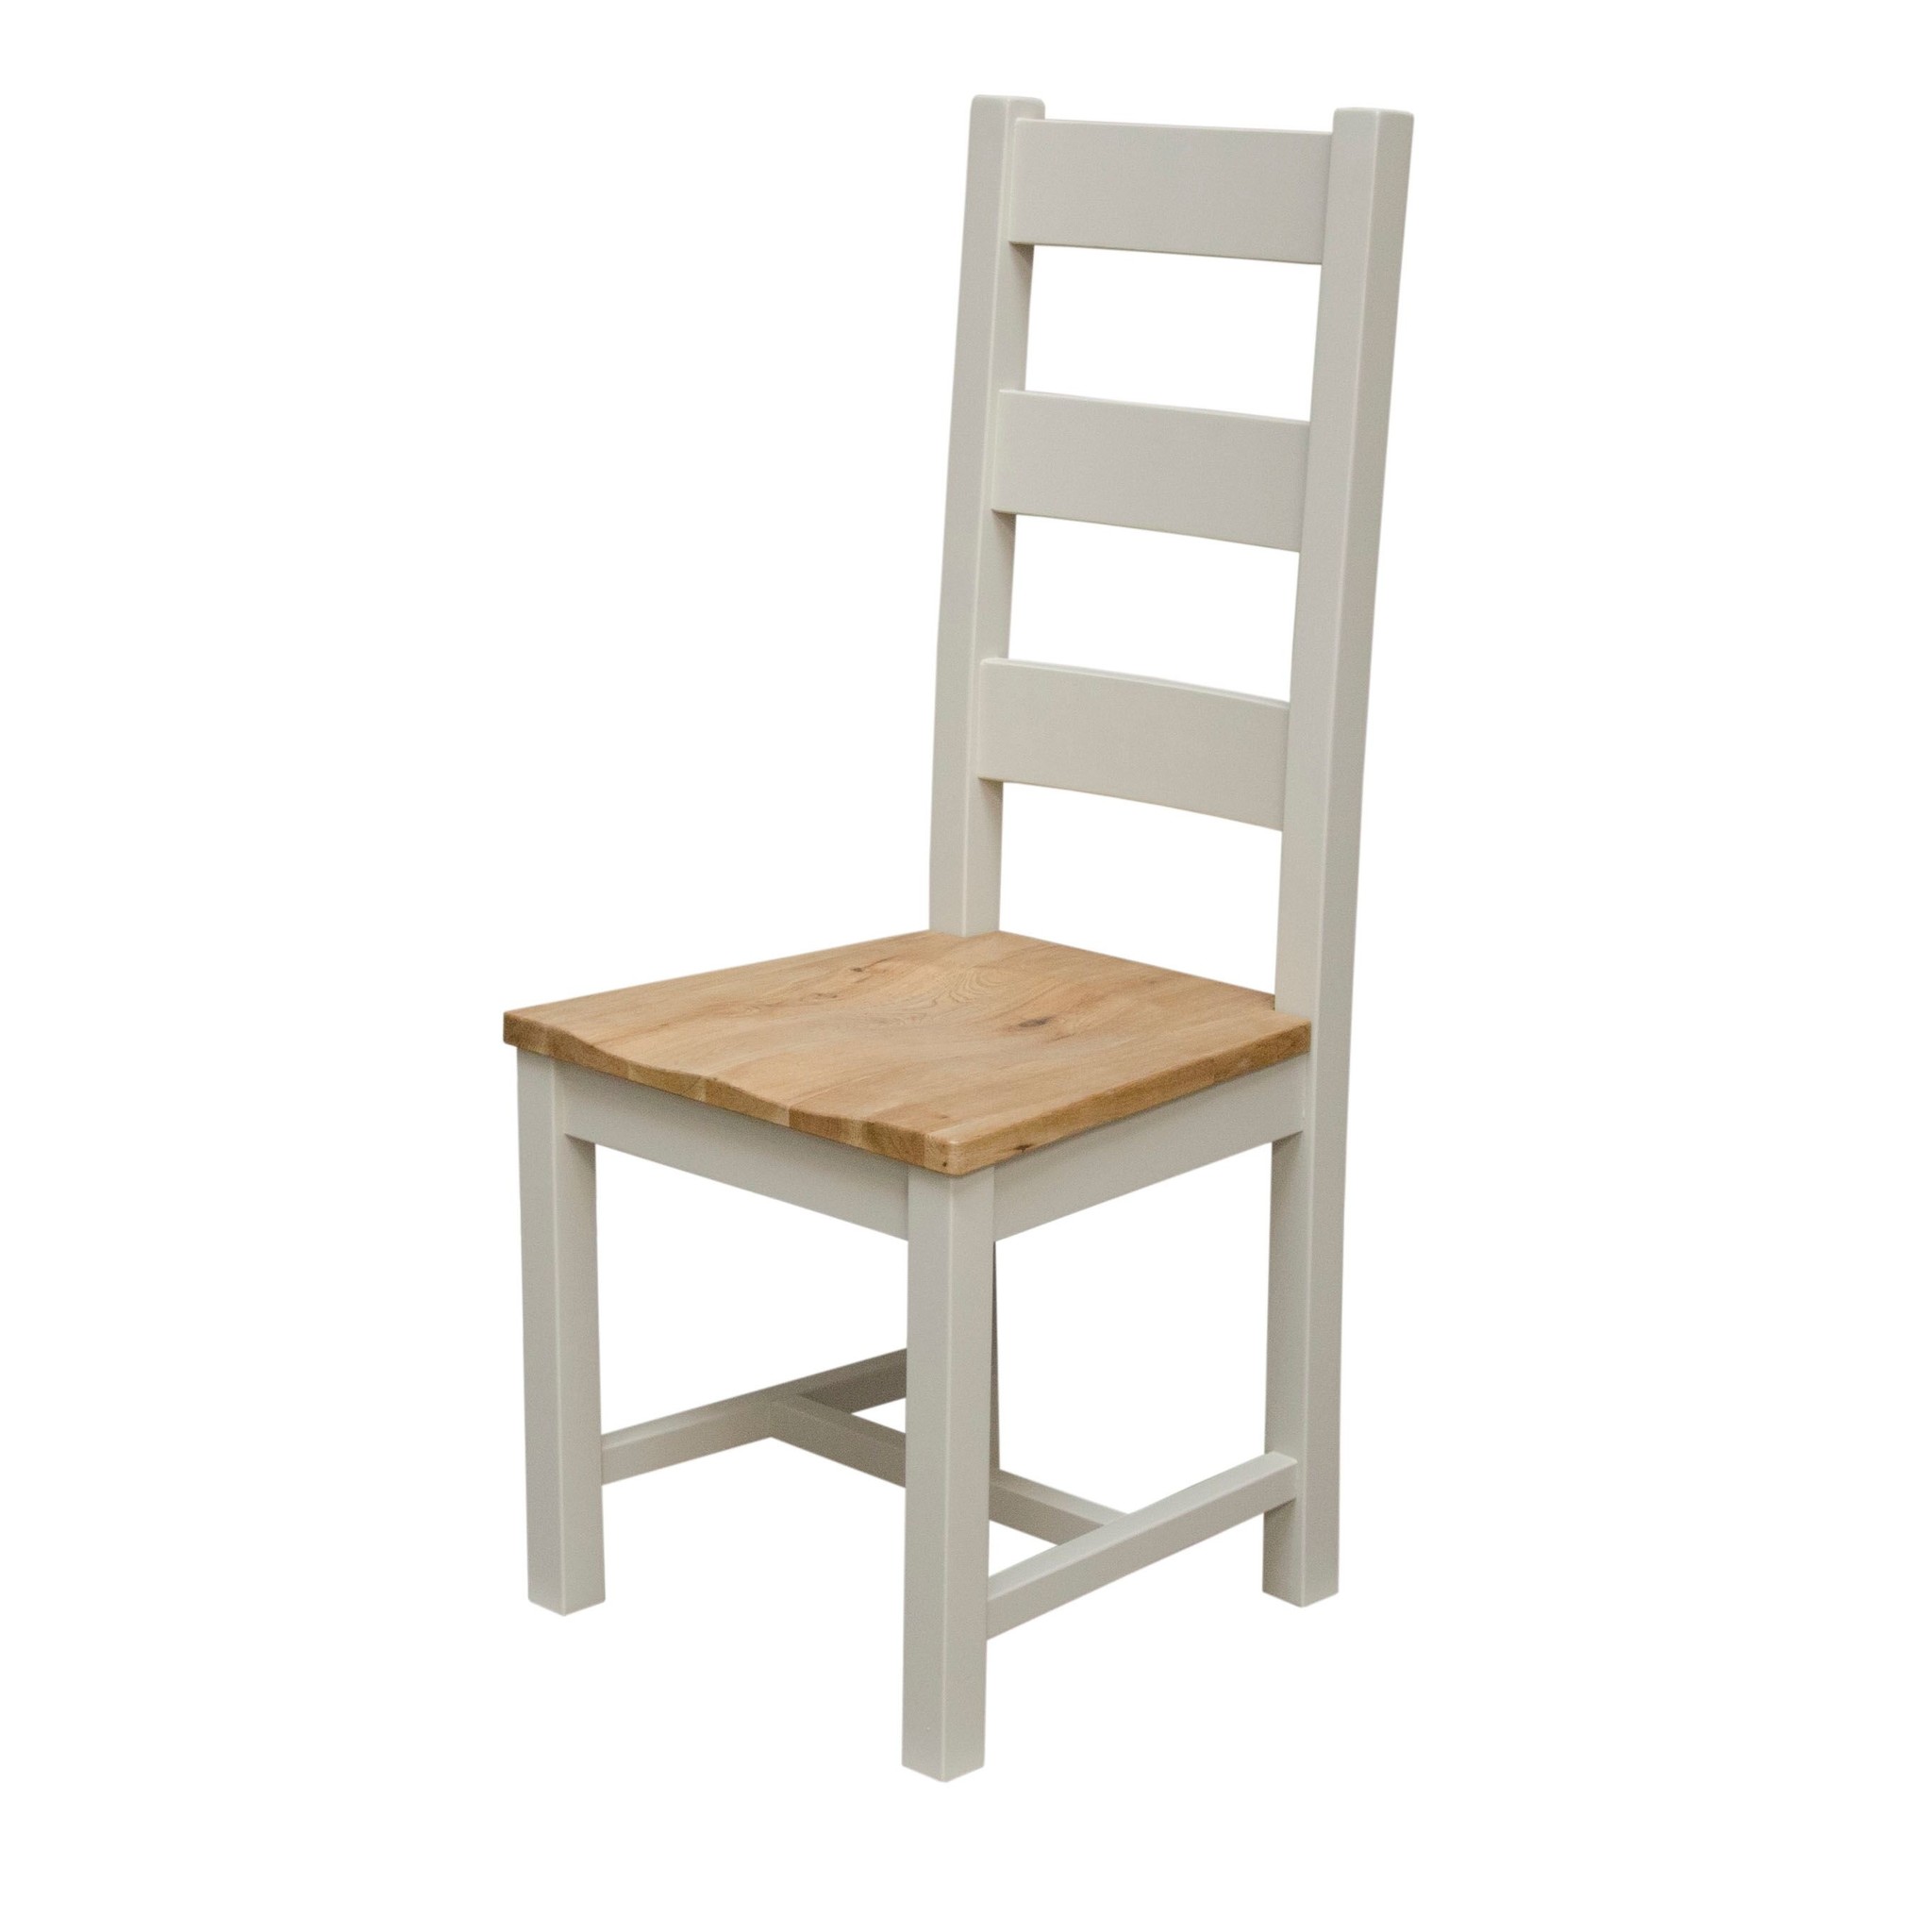 HomestyleGB Painted Deluxe Ladder Back Dining Chair